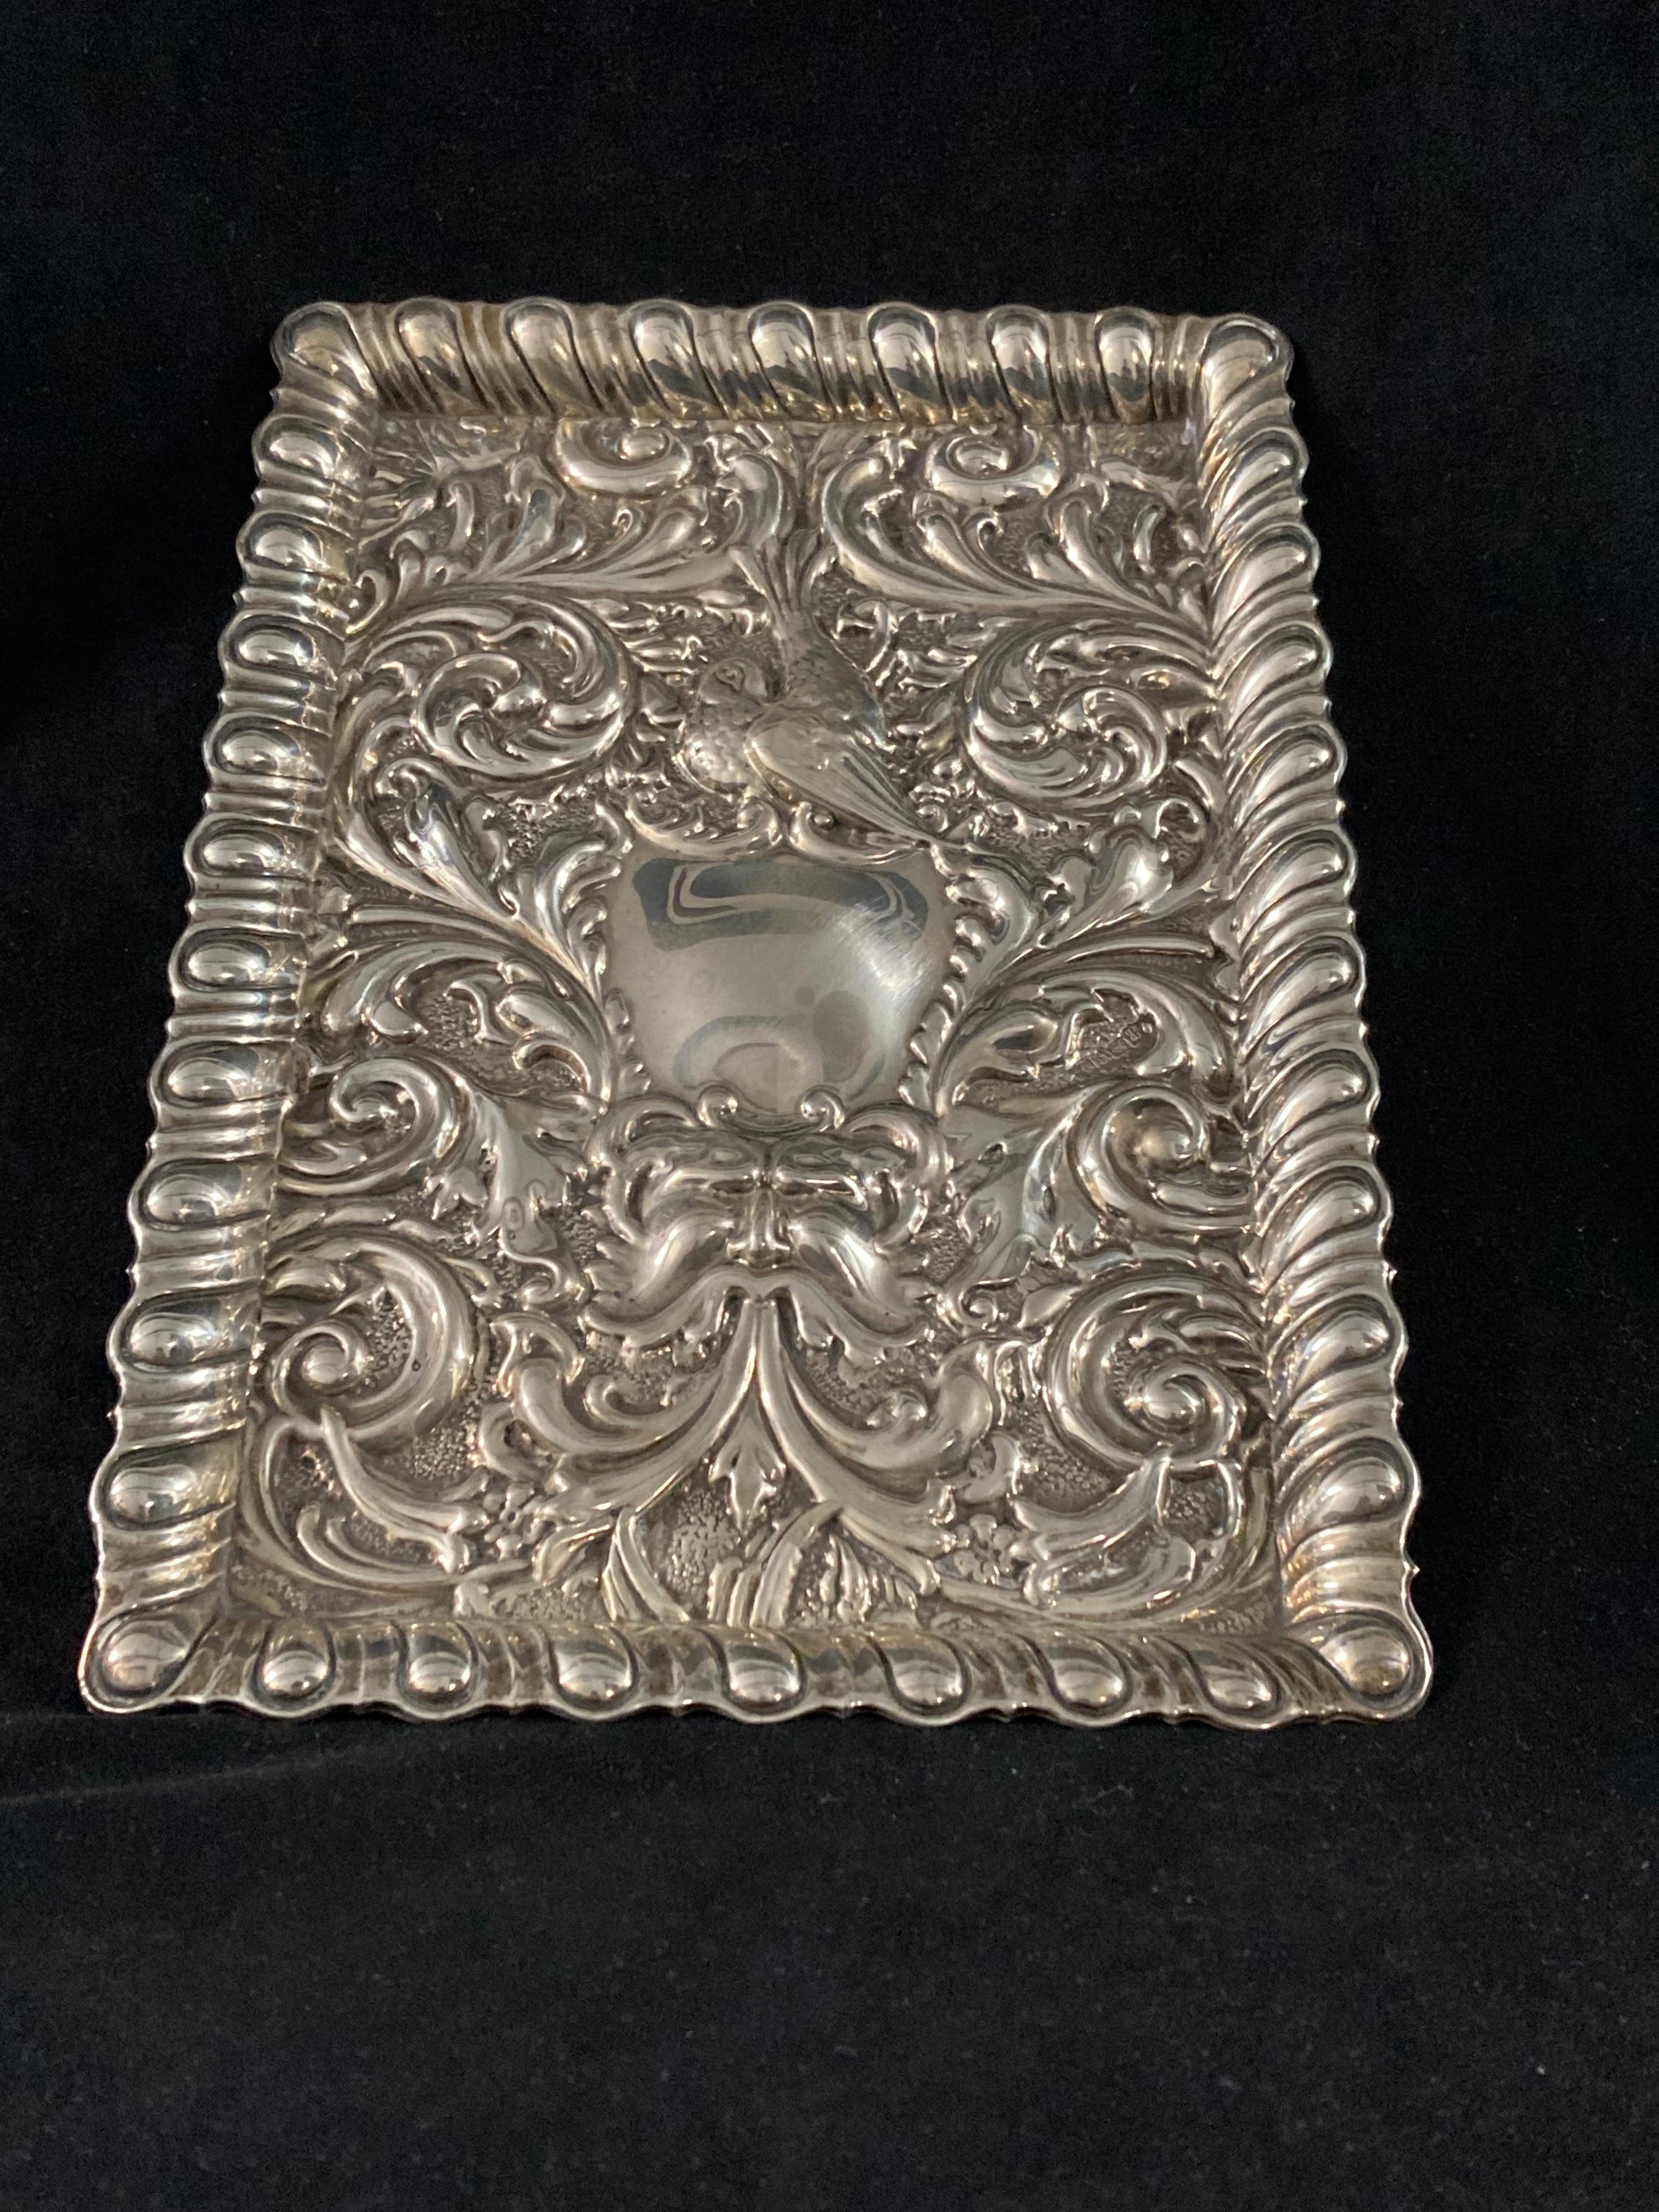 A 1905 Edwardian sterling silver tray by John & William Deakin In Good Condition For Sale In London, GB